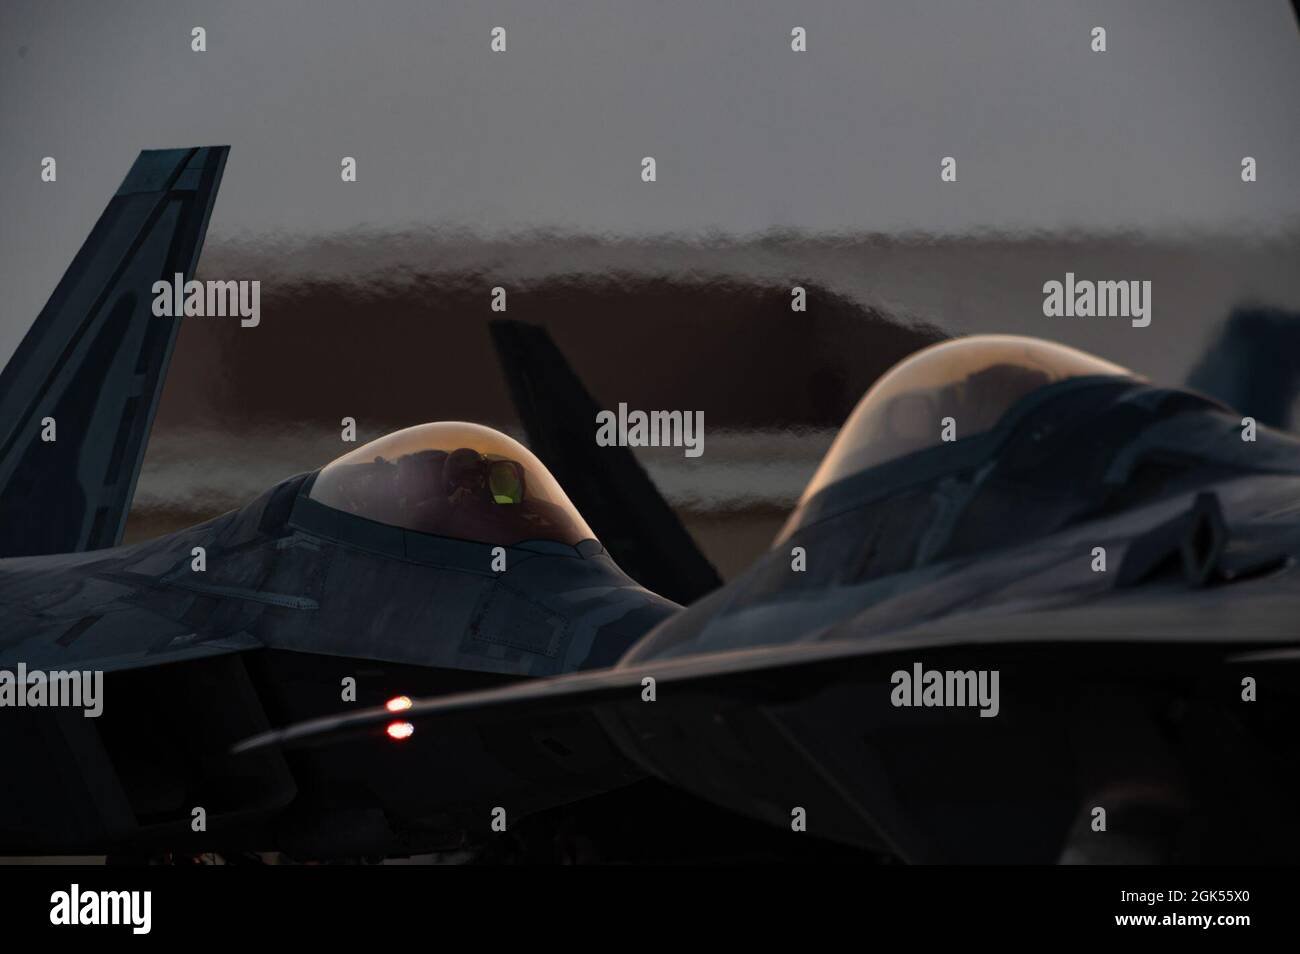 Two F-22 Raptors assigned to the 1st Fighter Wing, Langley Air Force Base, Virginia, are started up for a night training mission during Red Flag-Nellis 21-3 at Nellis Air Force Base, Nevada Aug. 4, 2021. The 1st FW hosted RF-Nellis 21-3 as the lead wing with nearly 100 aircraft, such as the F-35, F-35, F-22, F-16CJ, F-16C, EC-130H, EA-18G, B-52, B-2, F/A-18 C/D, MQ-9, E-3, E-8, RC-135, RQ-4B30, RQ-4B40, U-2, HH-60, HC-130, KC-135 and KC-46 participated in complex mission scenarios against aggressor forces. Stock Photo